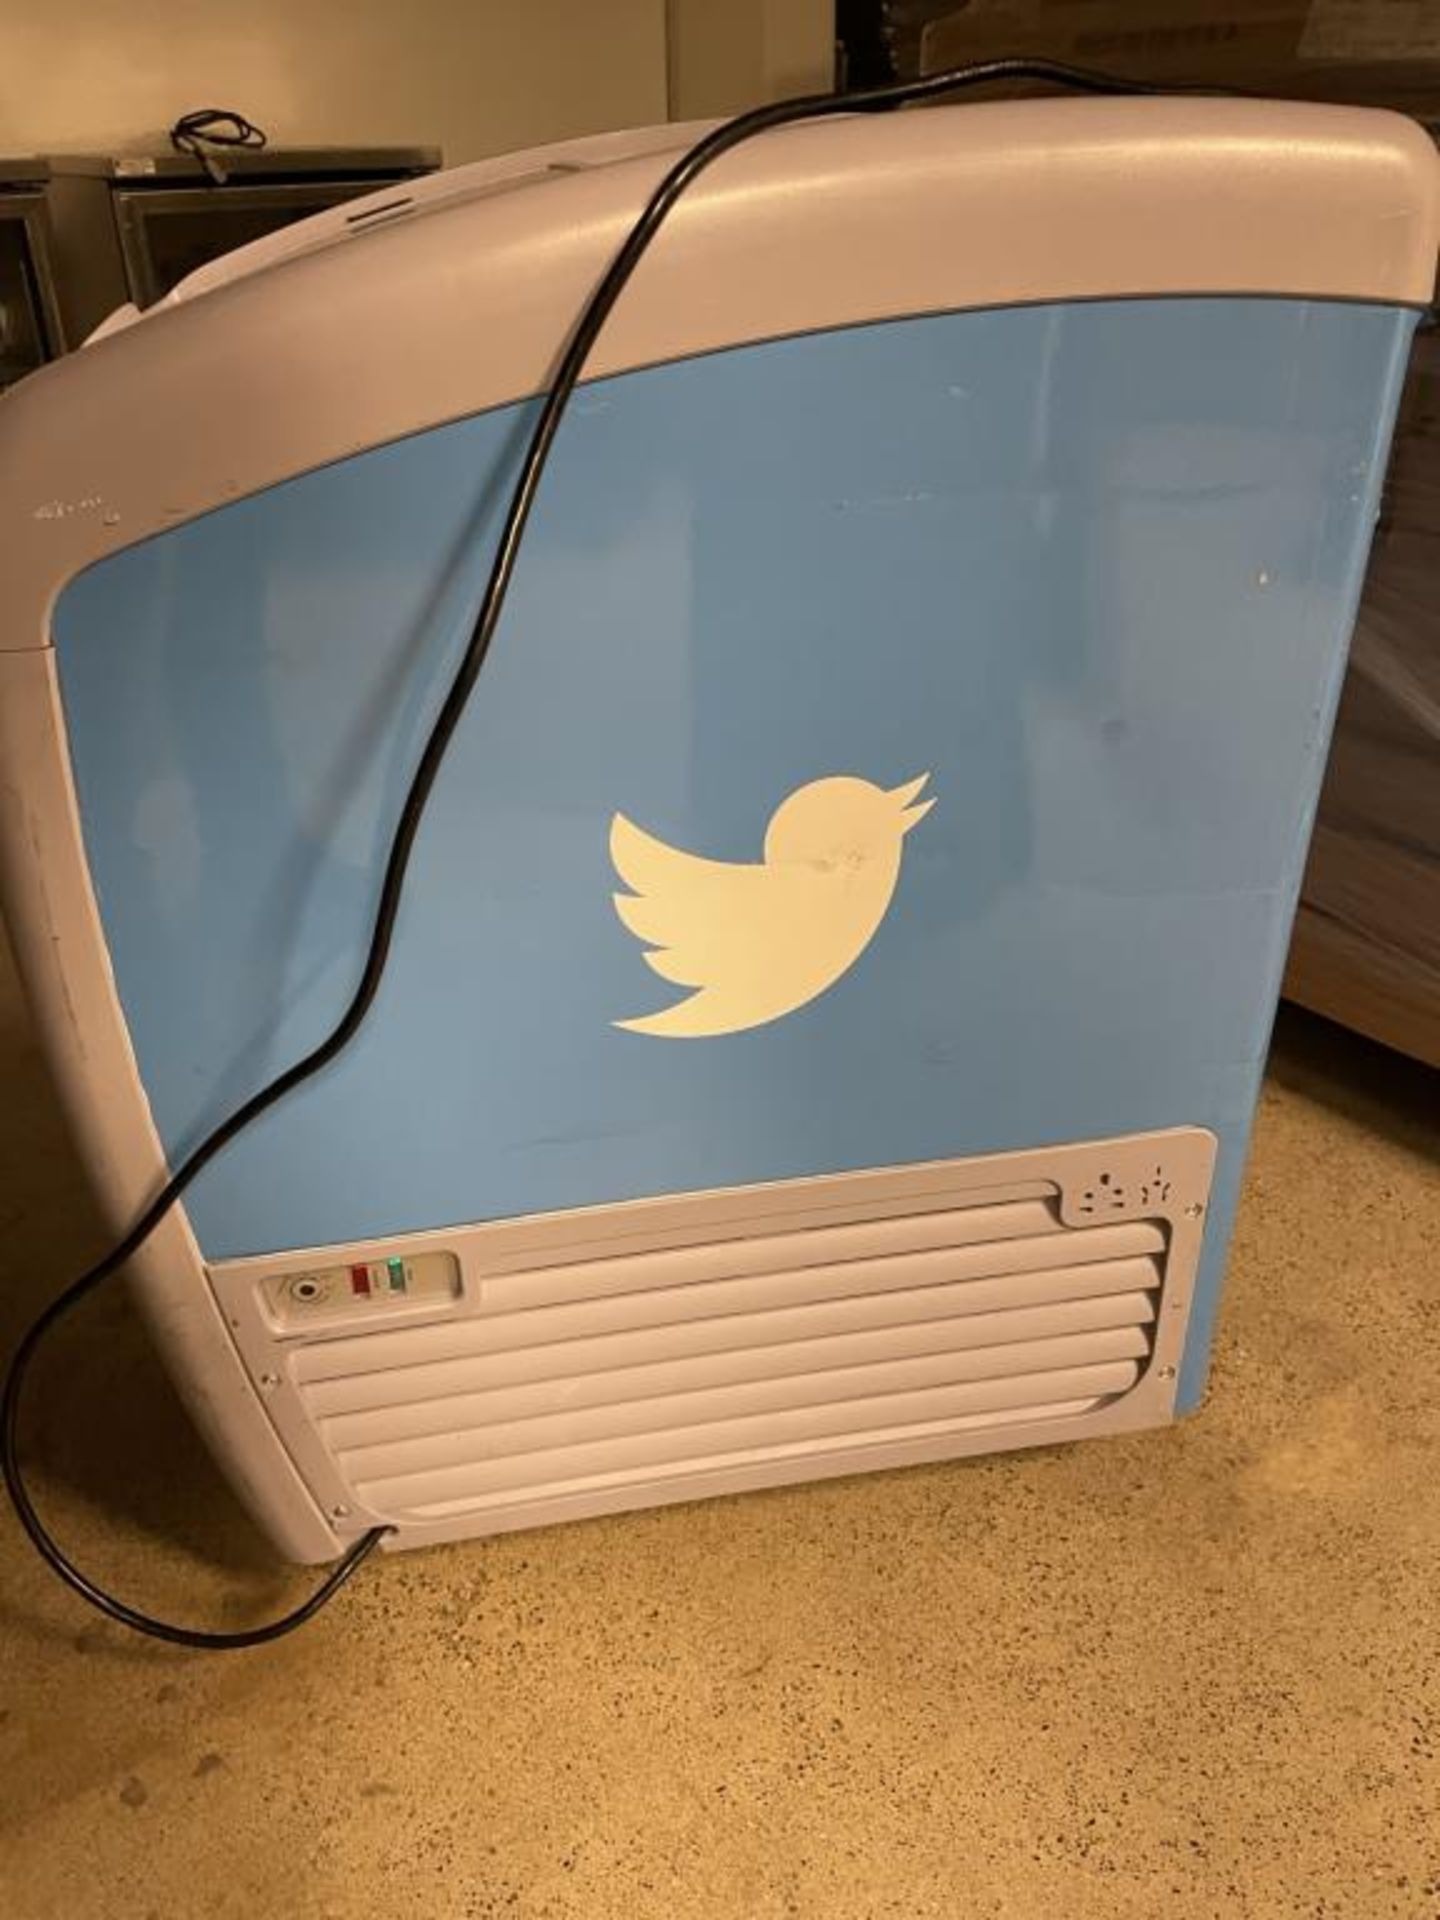 Twitter Branded Curved Top Display Ice Cream Freezer - Image 7 of 11